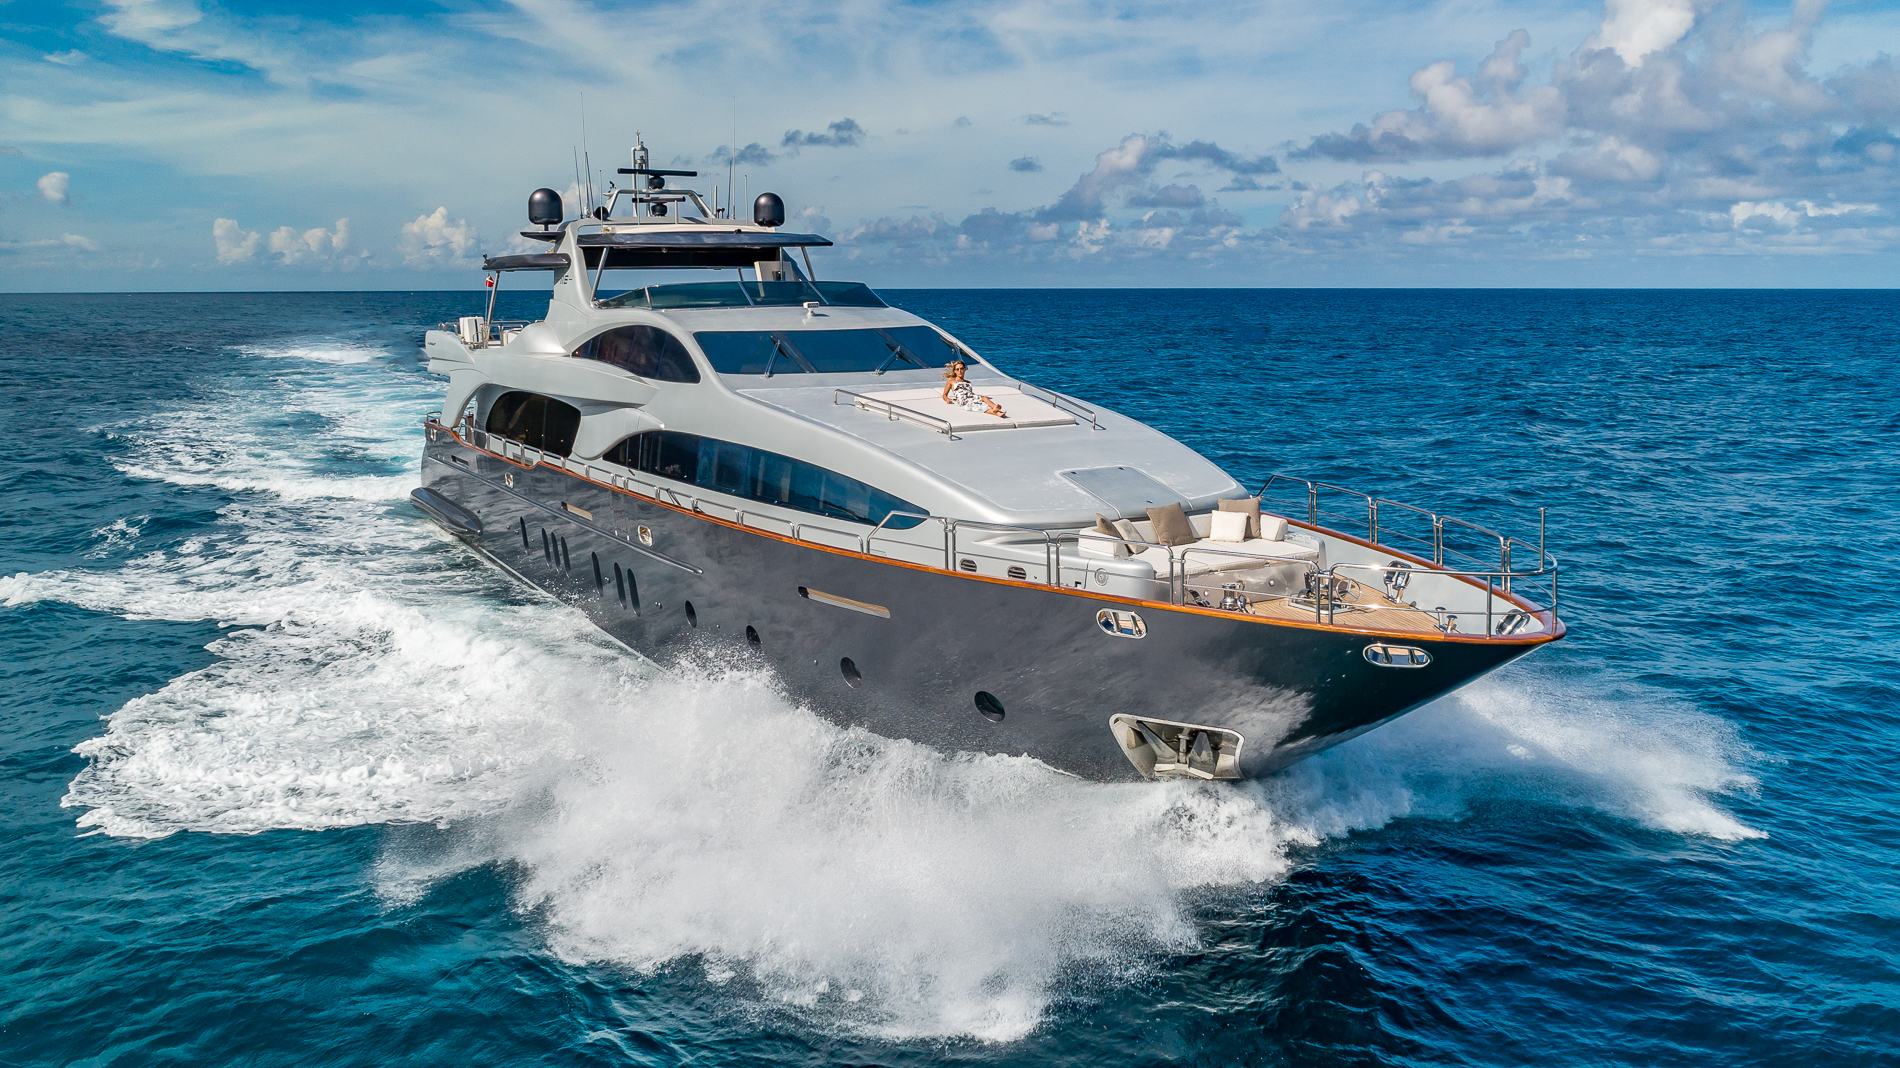 Your Floating Resort Vacation – The Spectacular 116’ Azimut Grande Motor Yacht, “Tail Lights”